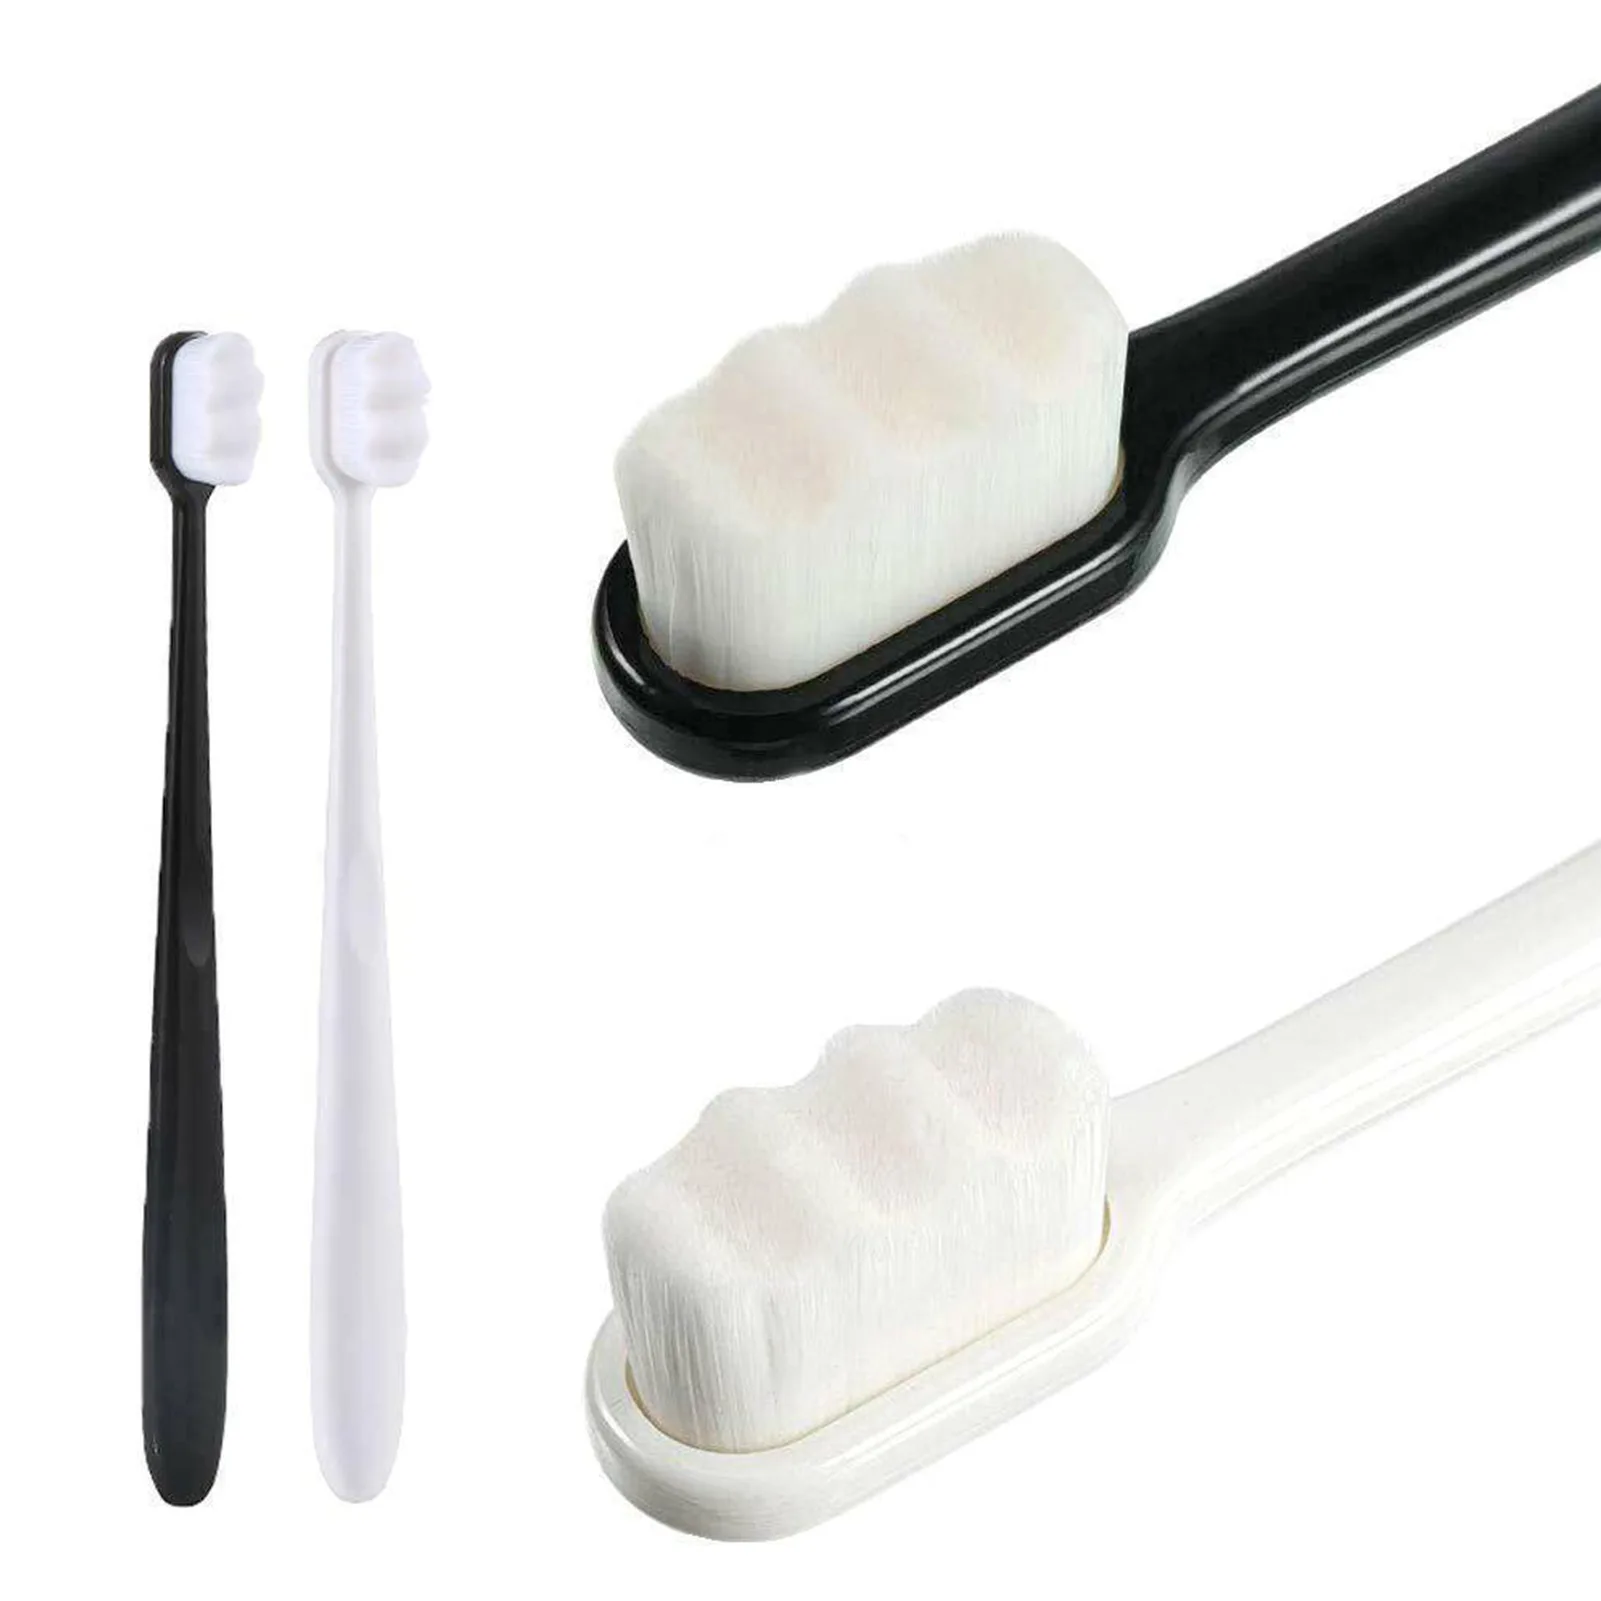 

4pcs Long Handle With Cover For Fragile Gums Oral Hygiene Extra Soft Bathroom Adult Kid Manual Toothbrush Dental Care Portable